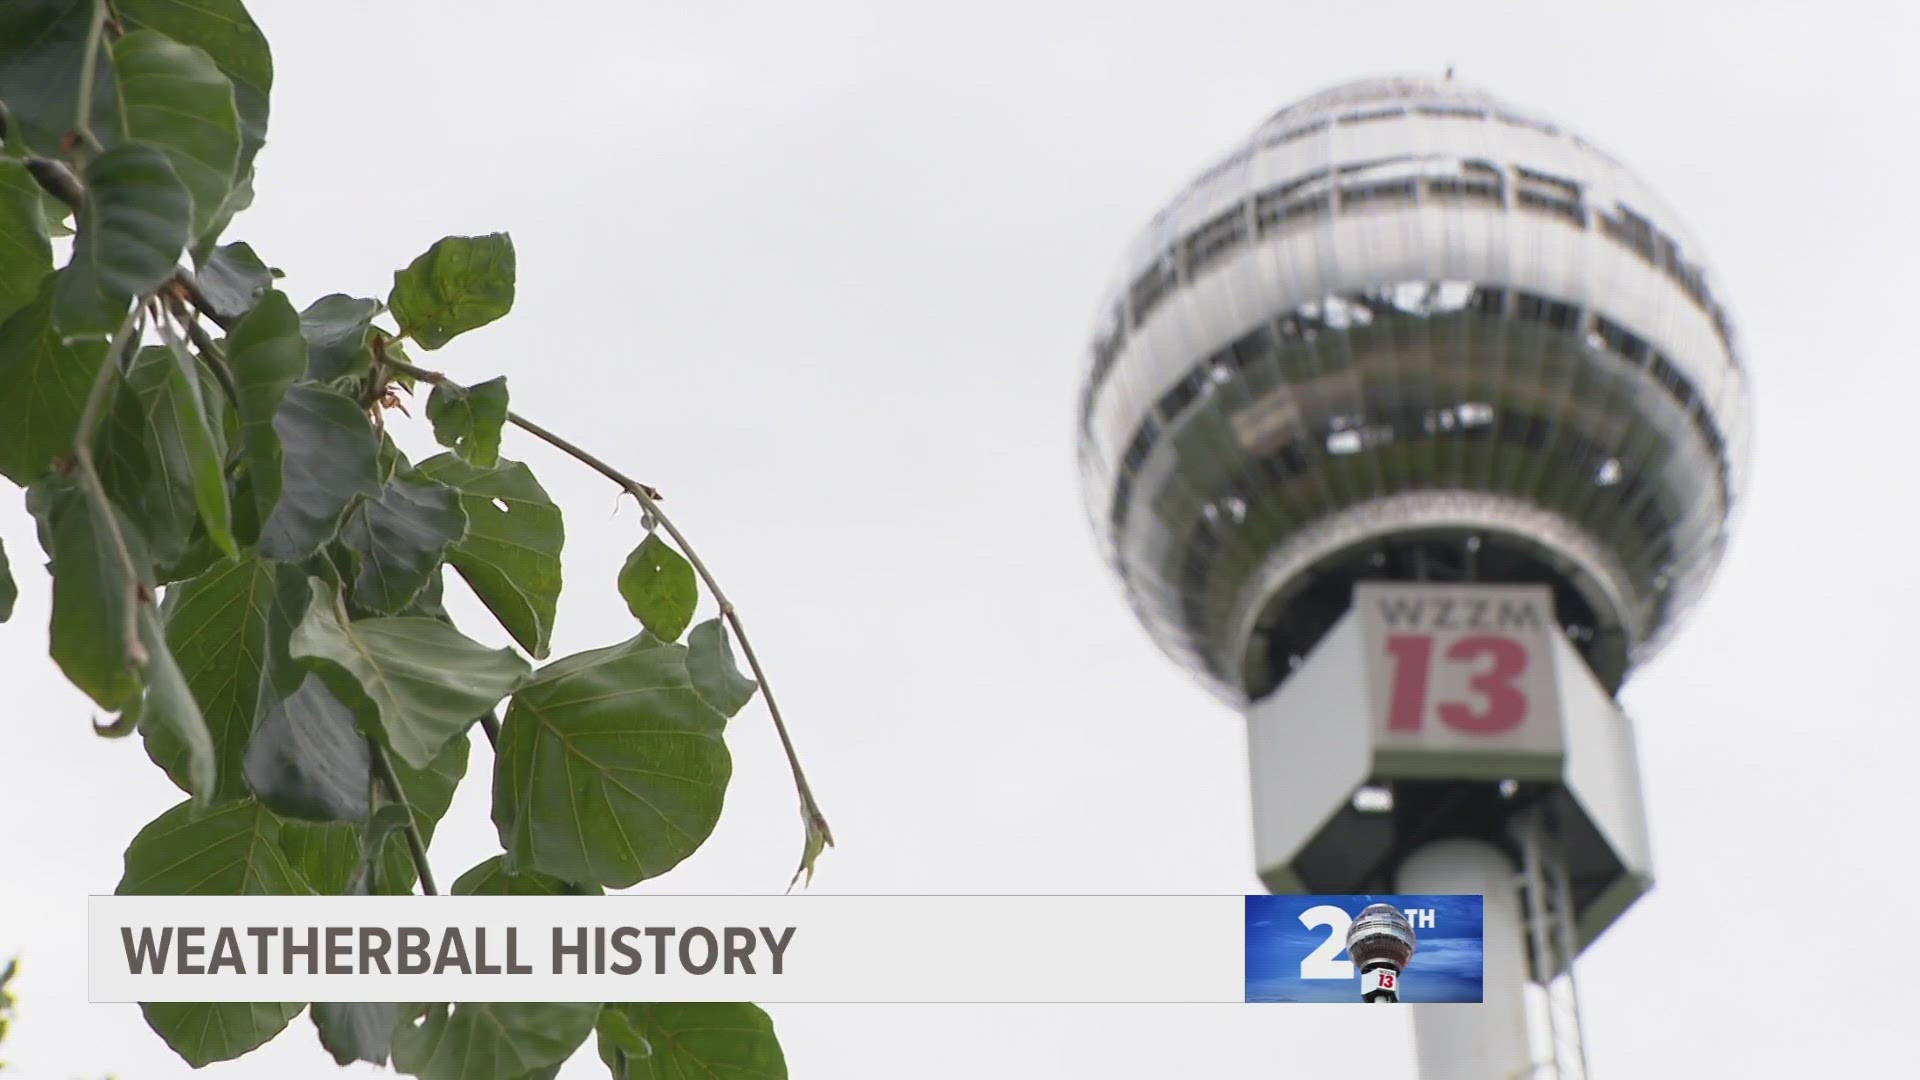 The Weatherball has been at 13 ON YOUR SIDE for 20 years this week. We're taking a look at how it first came to Walker in 2003.